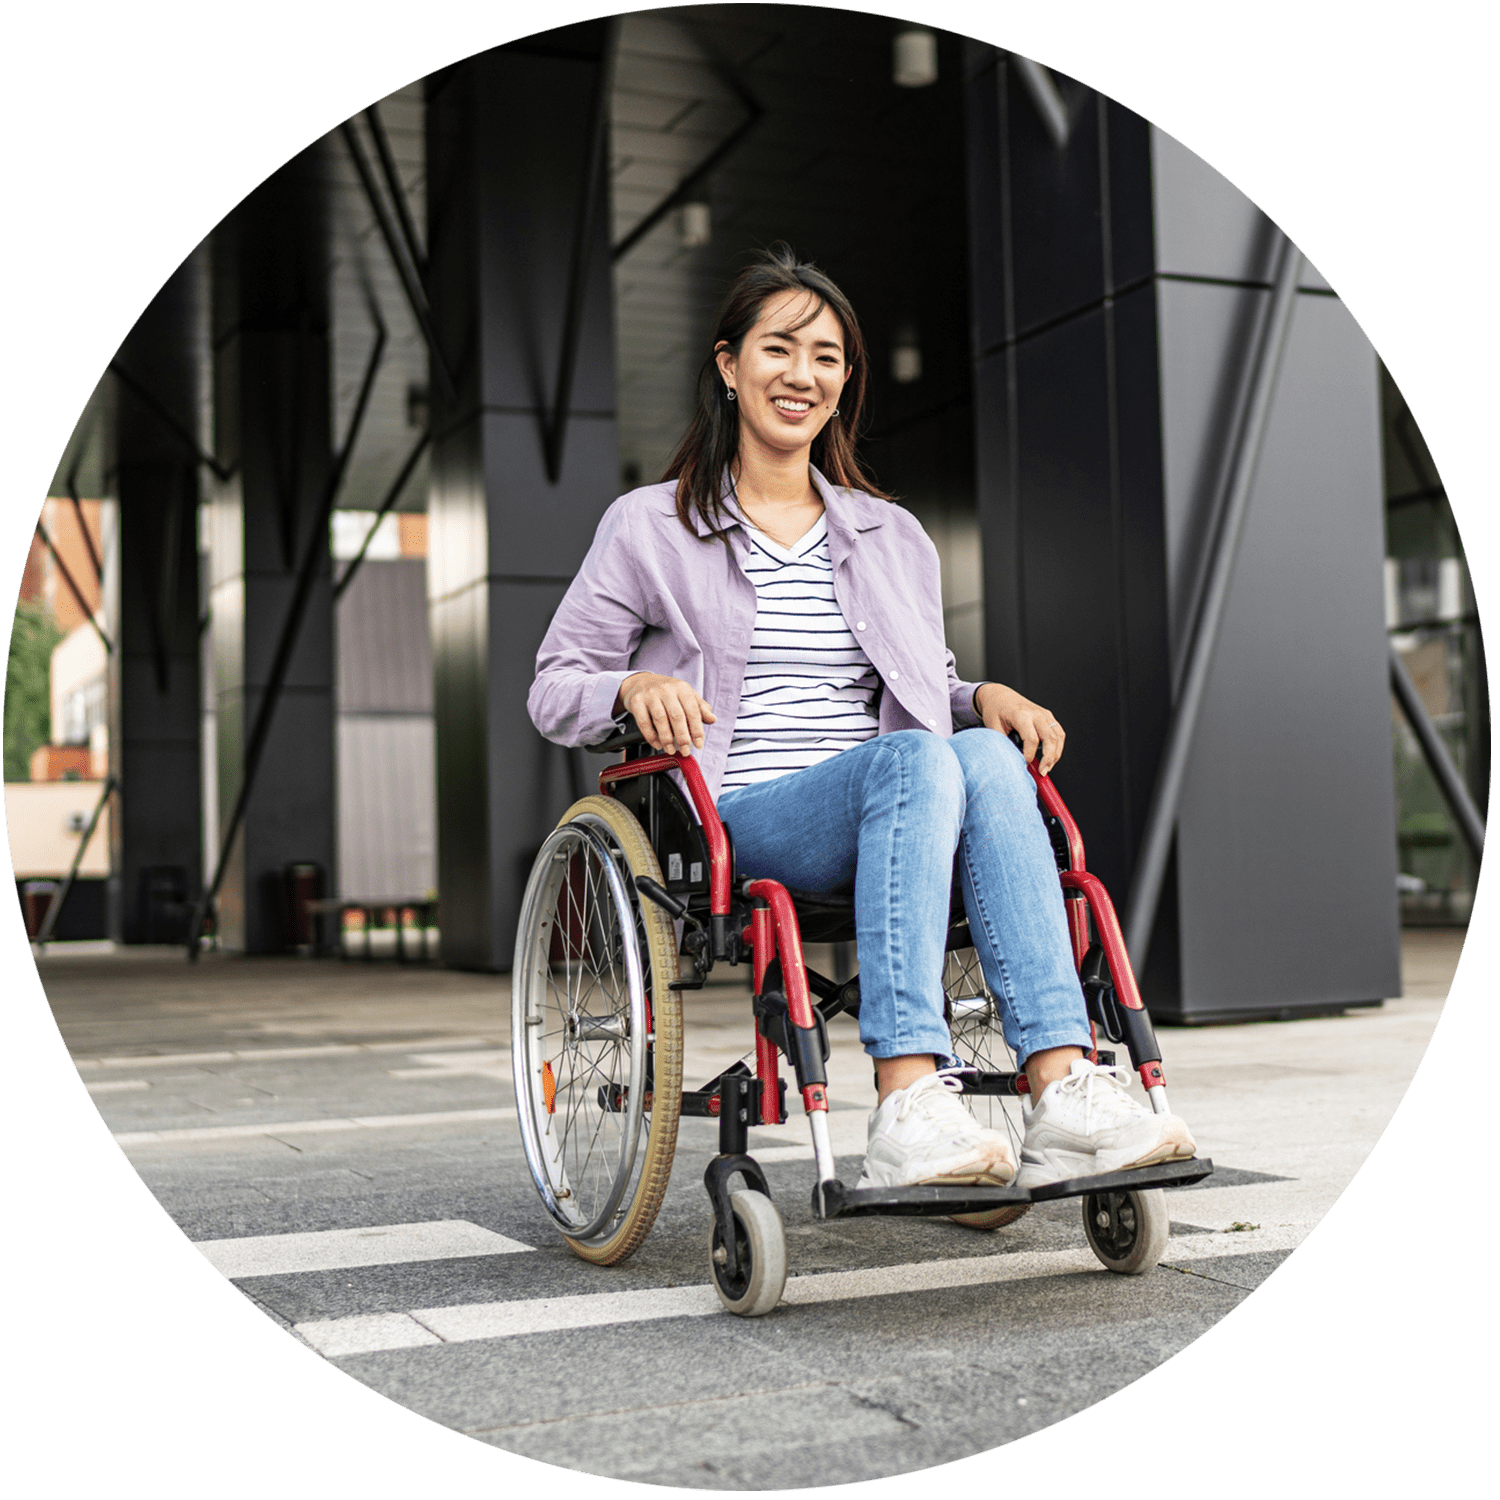 A smiling student in a wheelchair outside a building.